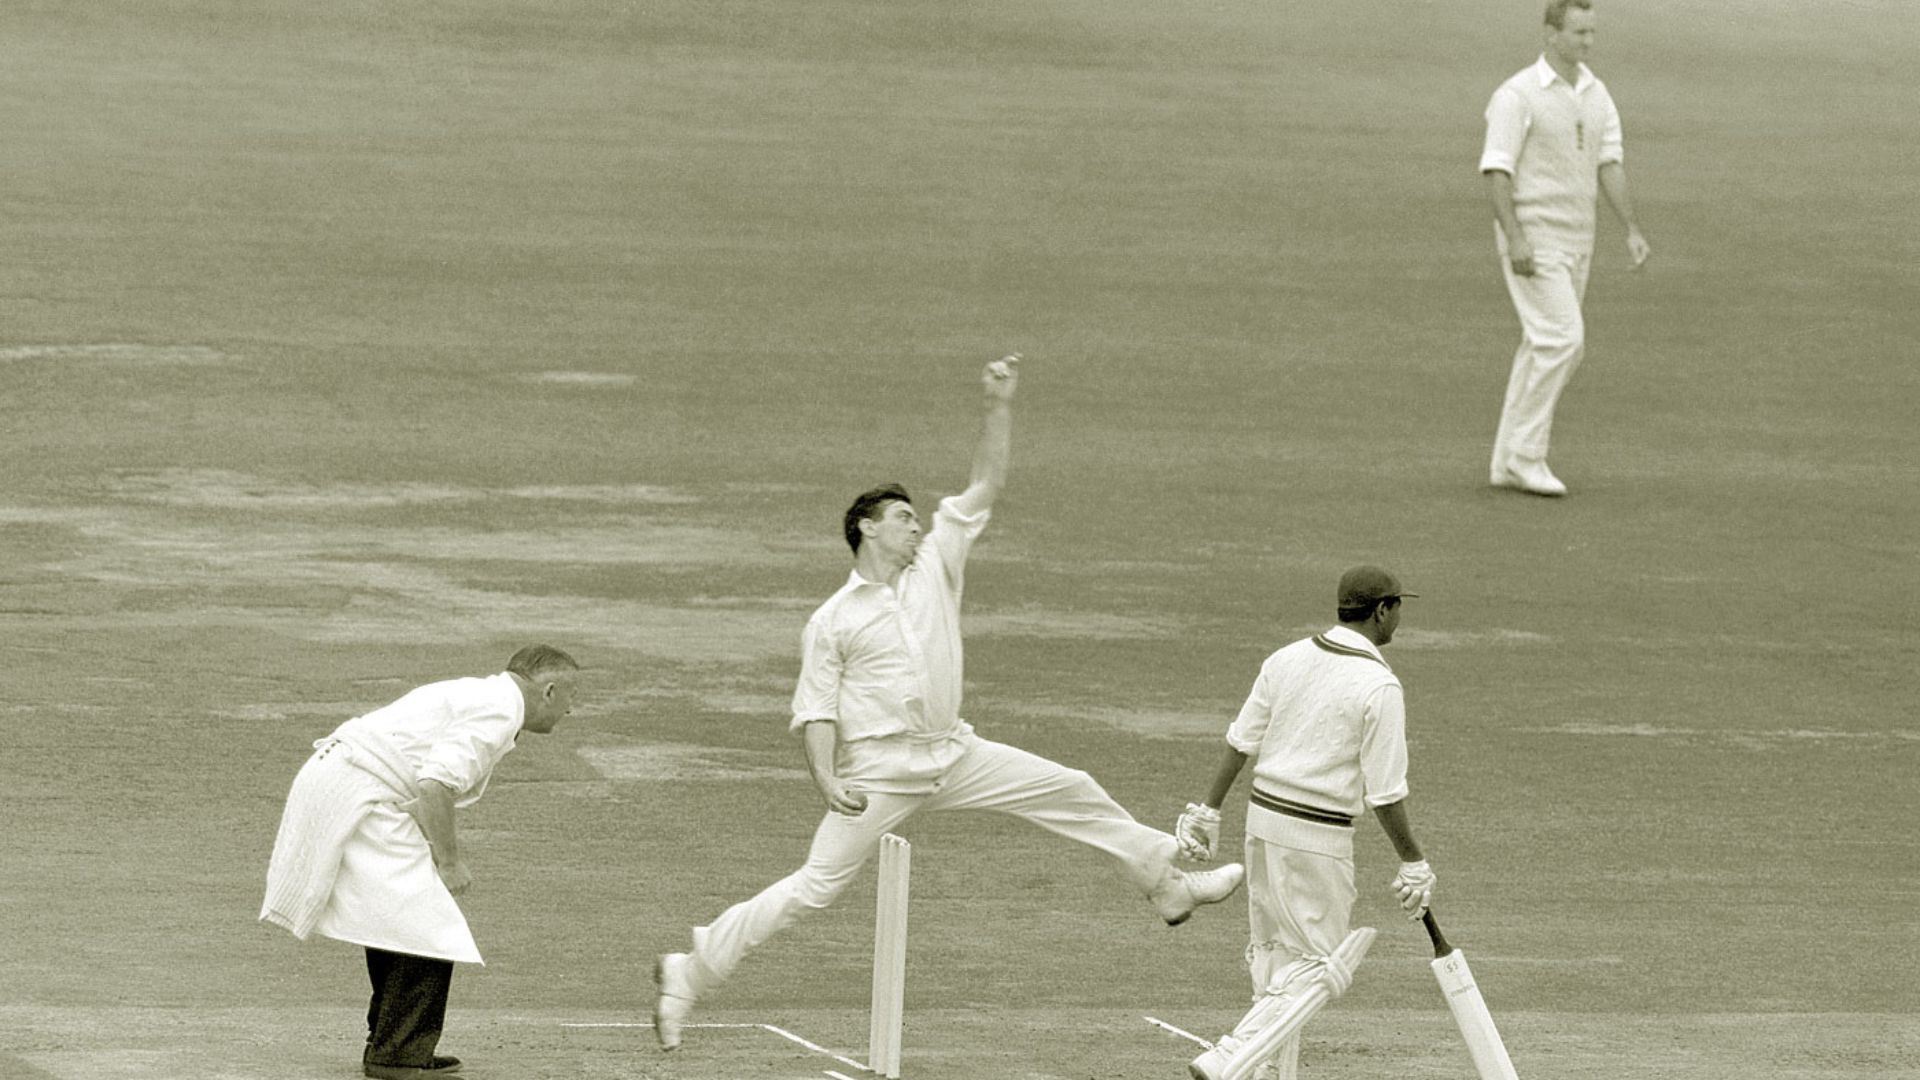 Trueman was the first bowler to bag 300 Test wickets.